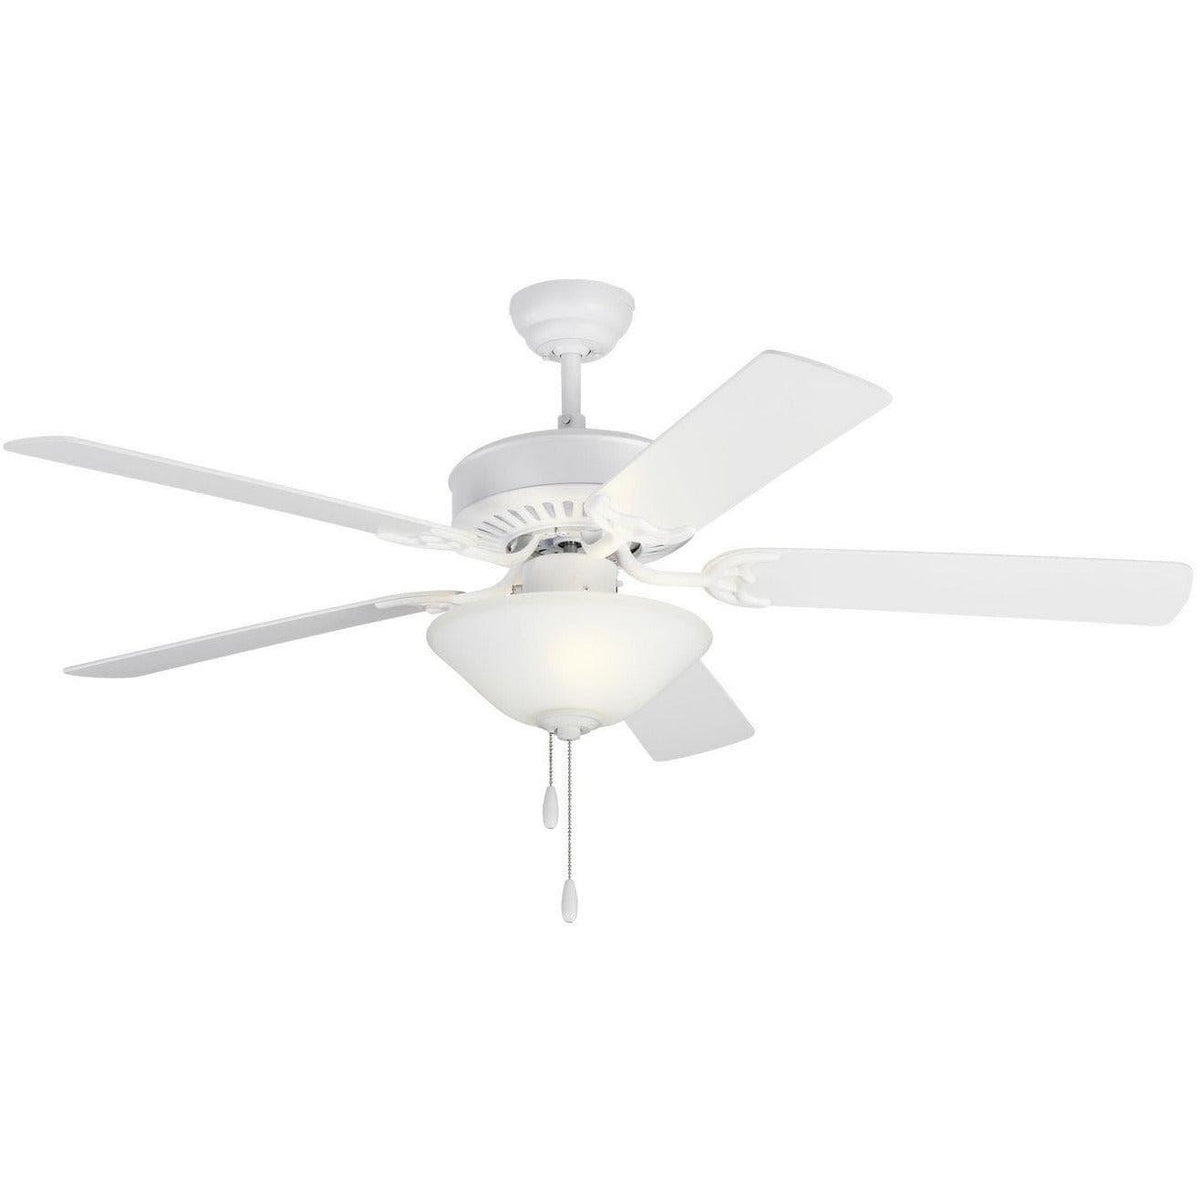 Visual Comfort Fan Collection - Haven DC 52" Ceiling Fan - 5HVDC52RZWD | Montreal Lighting & Hardware